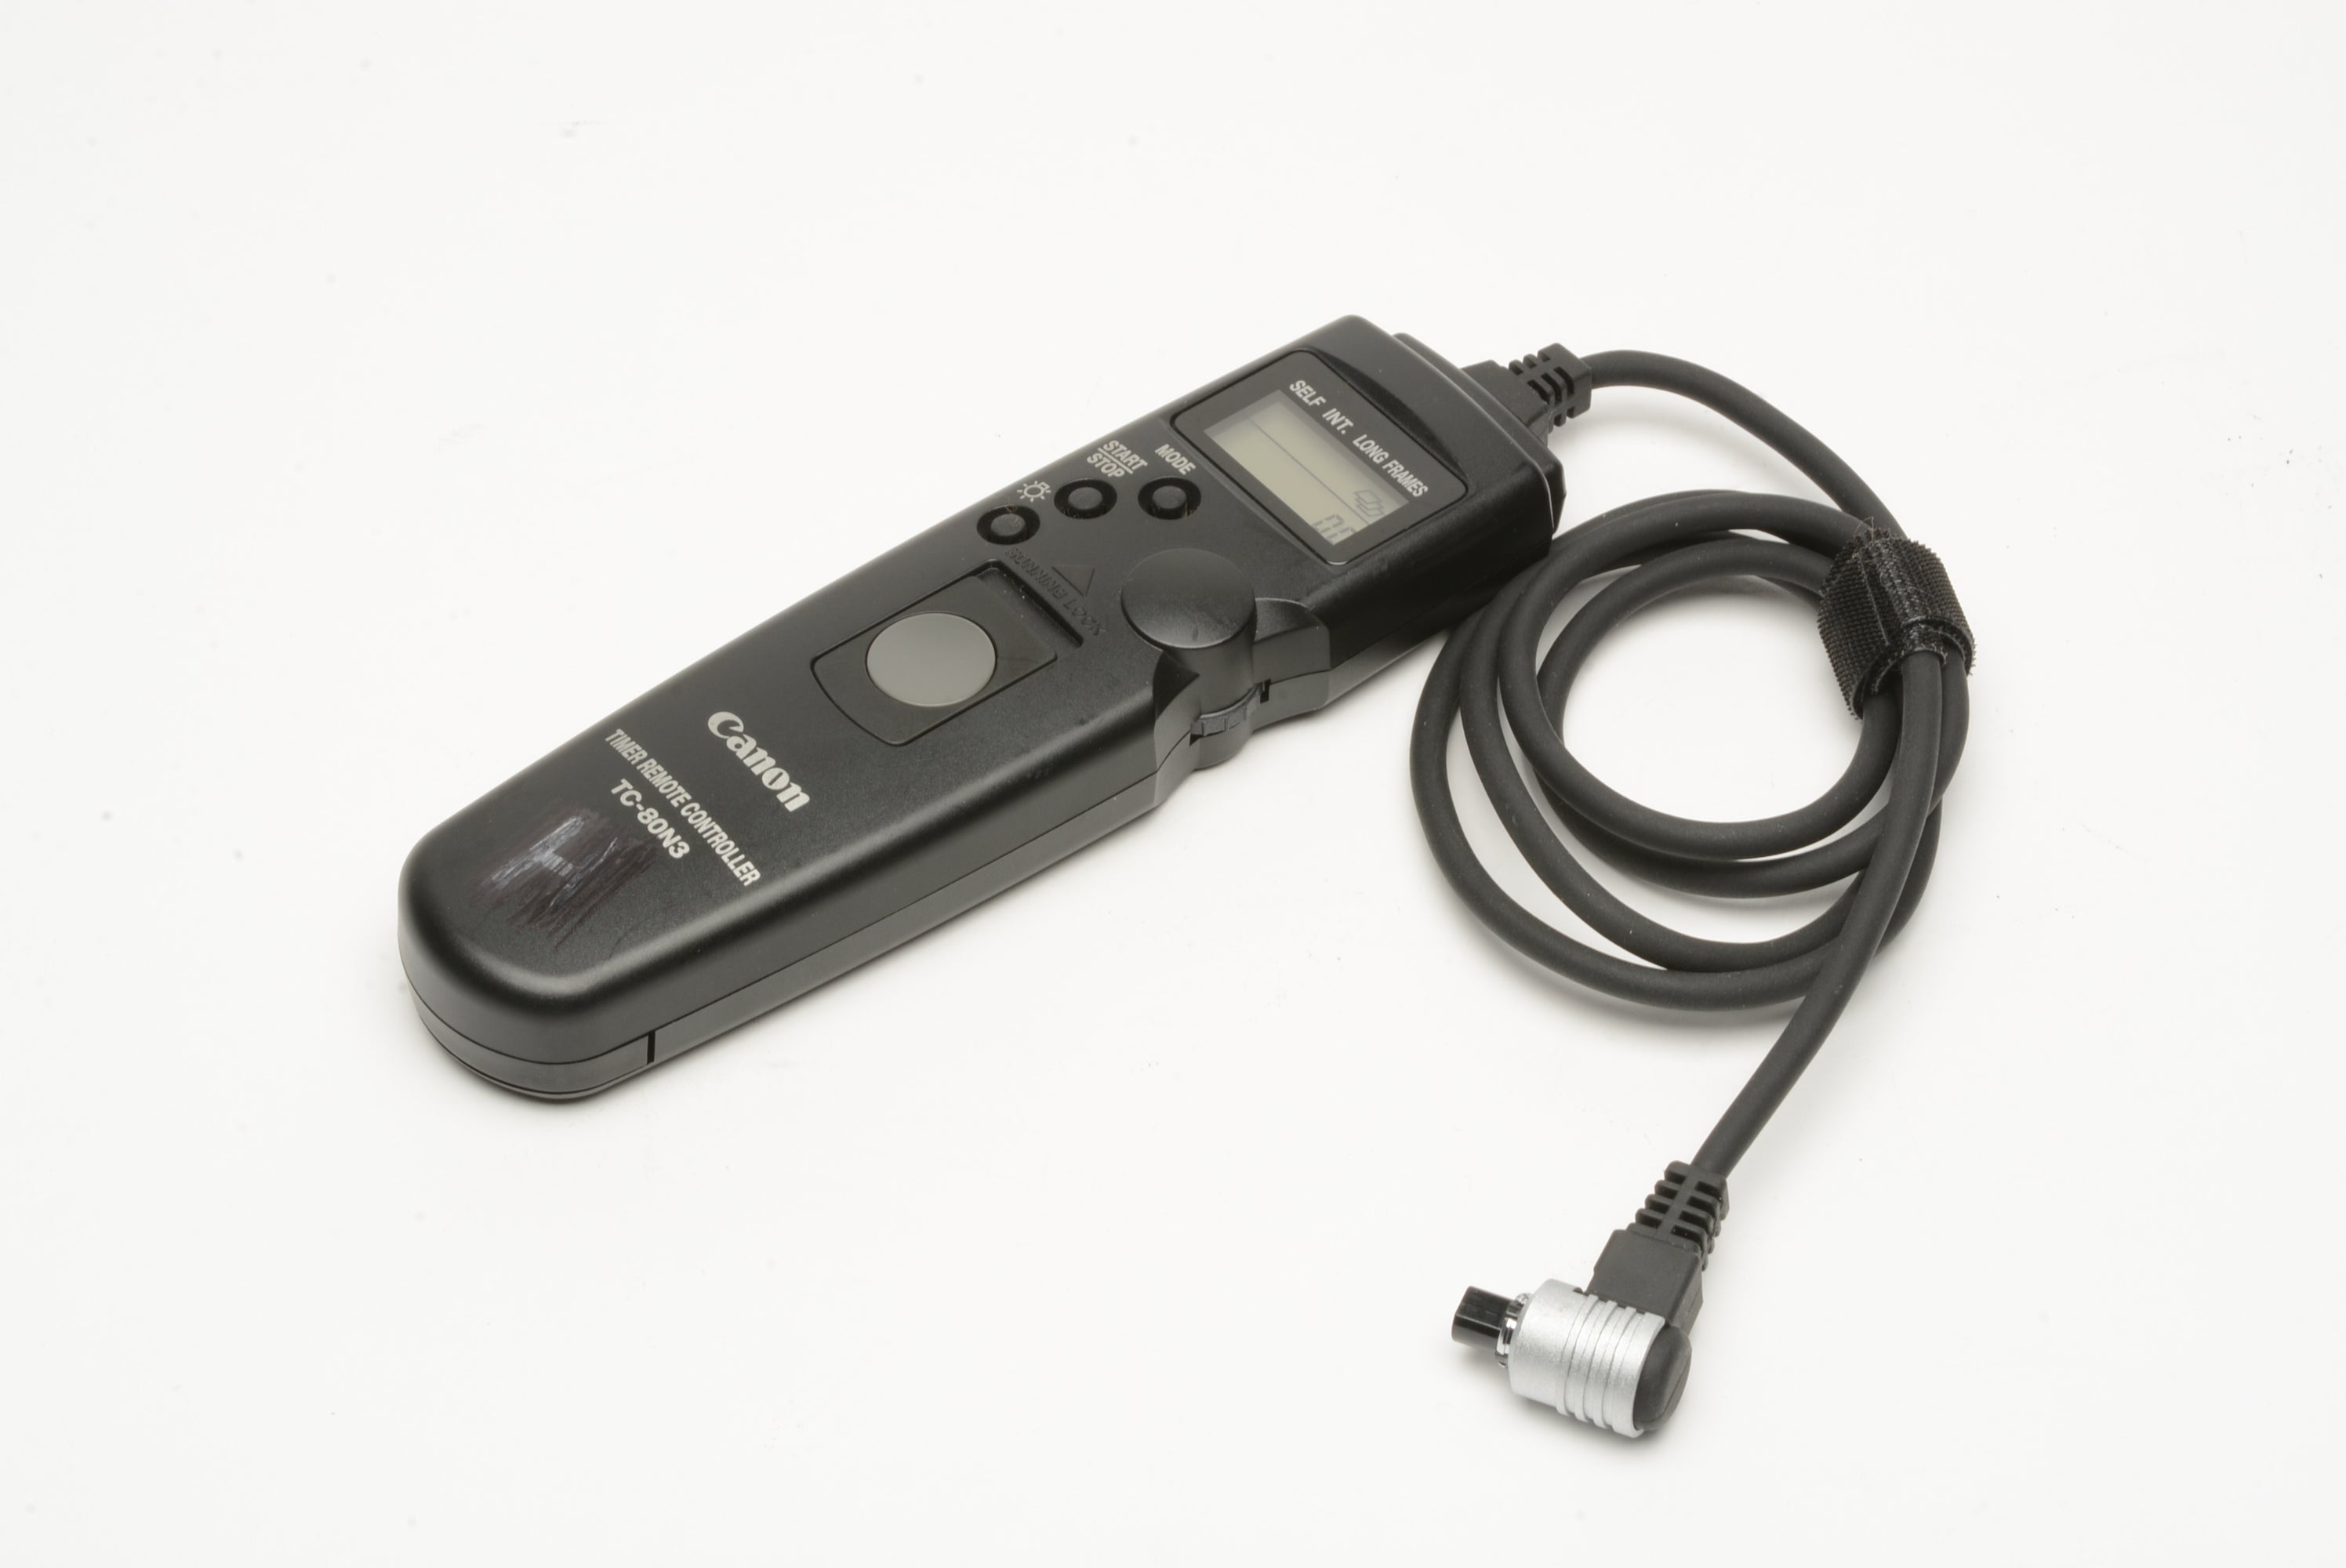 Blandet heltinde pølse Canon TC-80N3 wired remote control, tested, great – RecycledPhoto